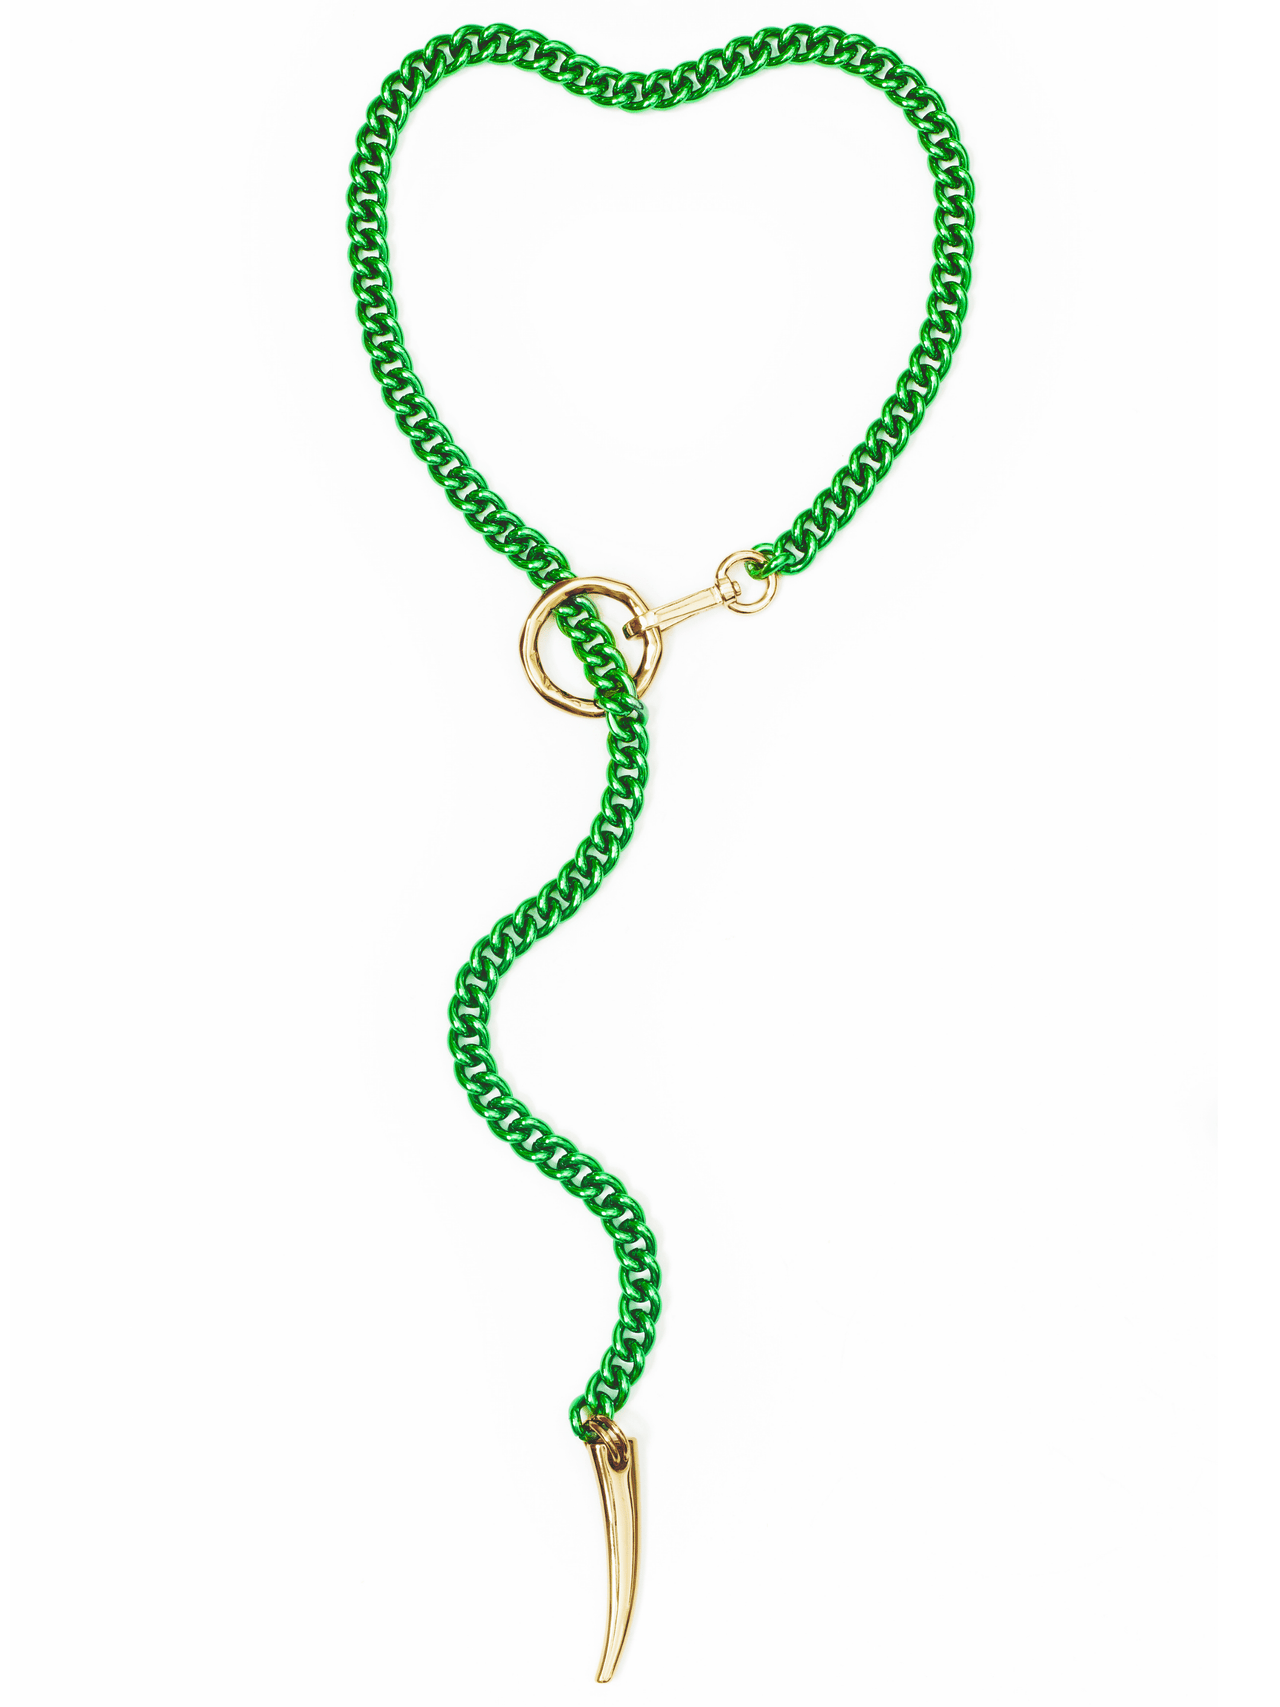 NEW! FORBIDDEN Necklace - Green - Limited Edition